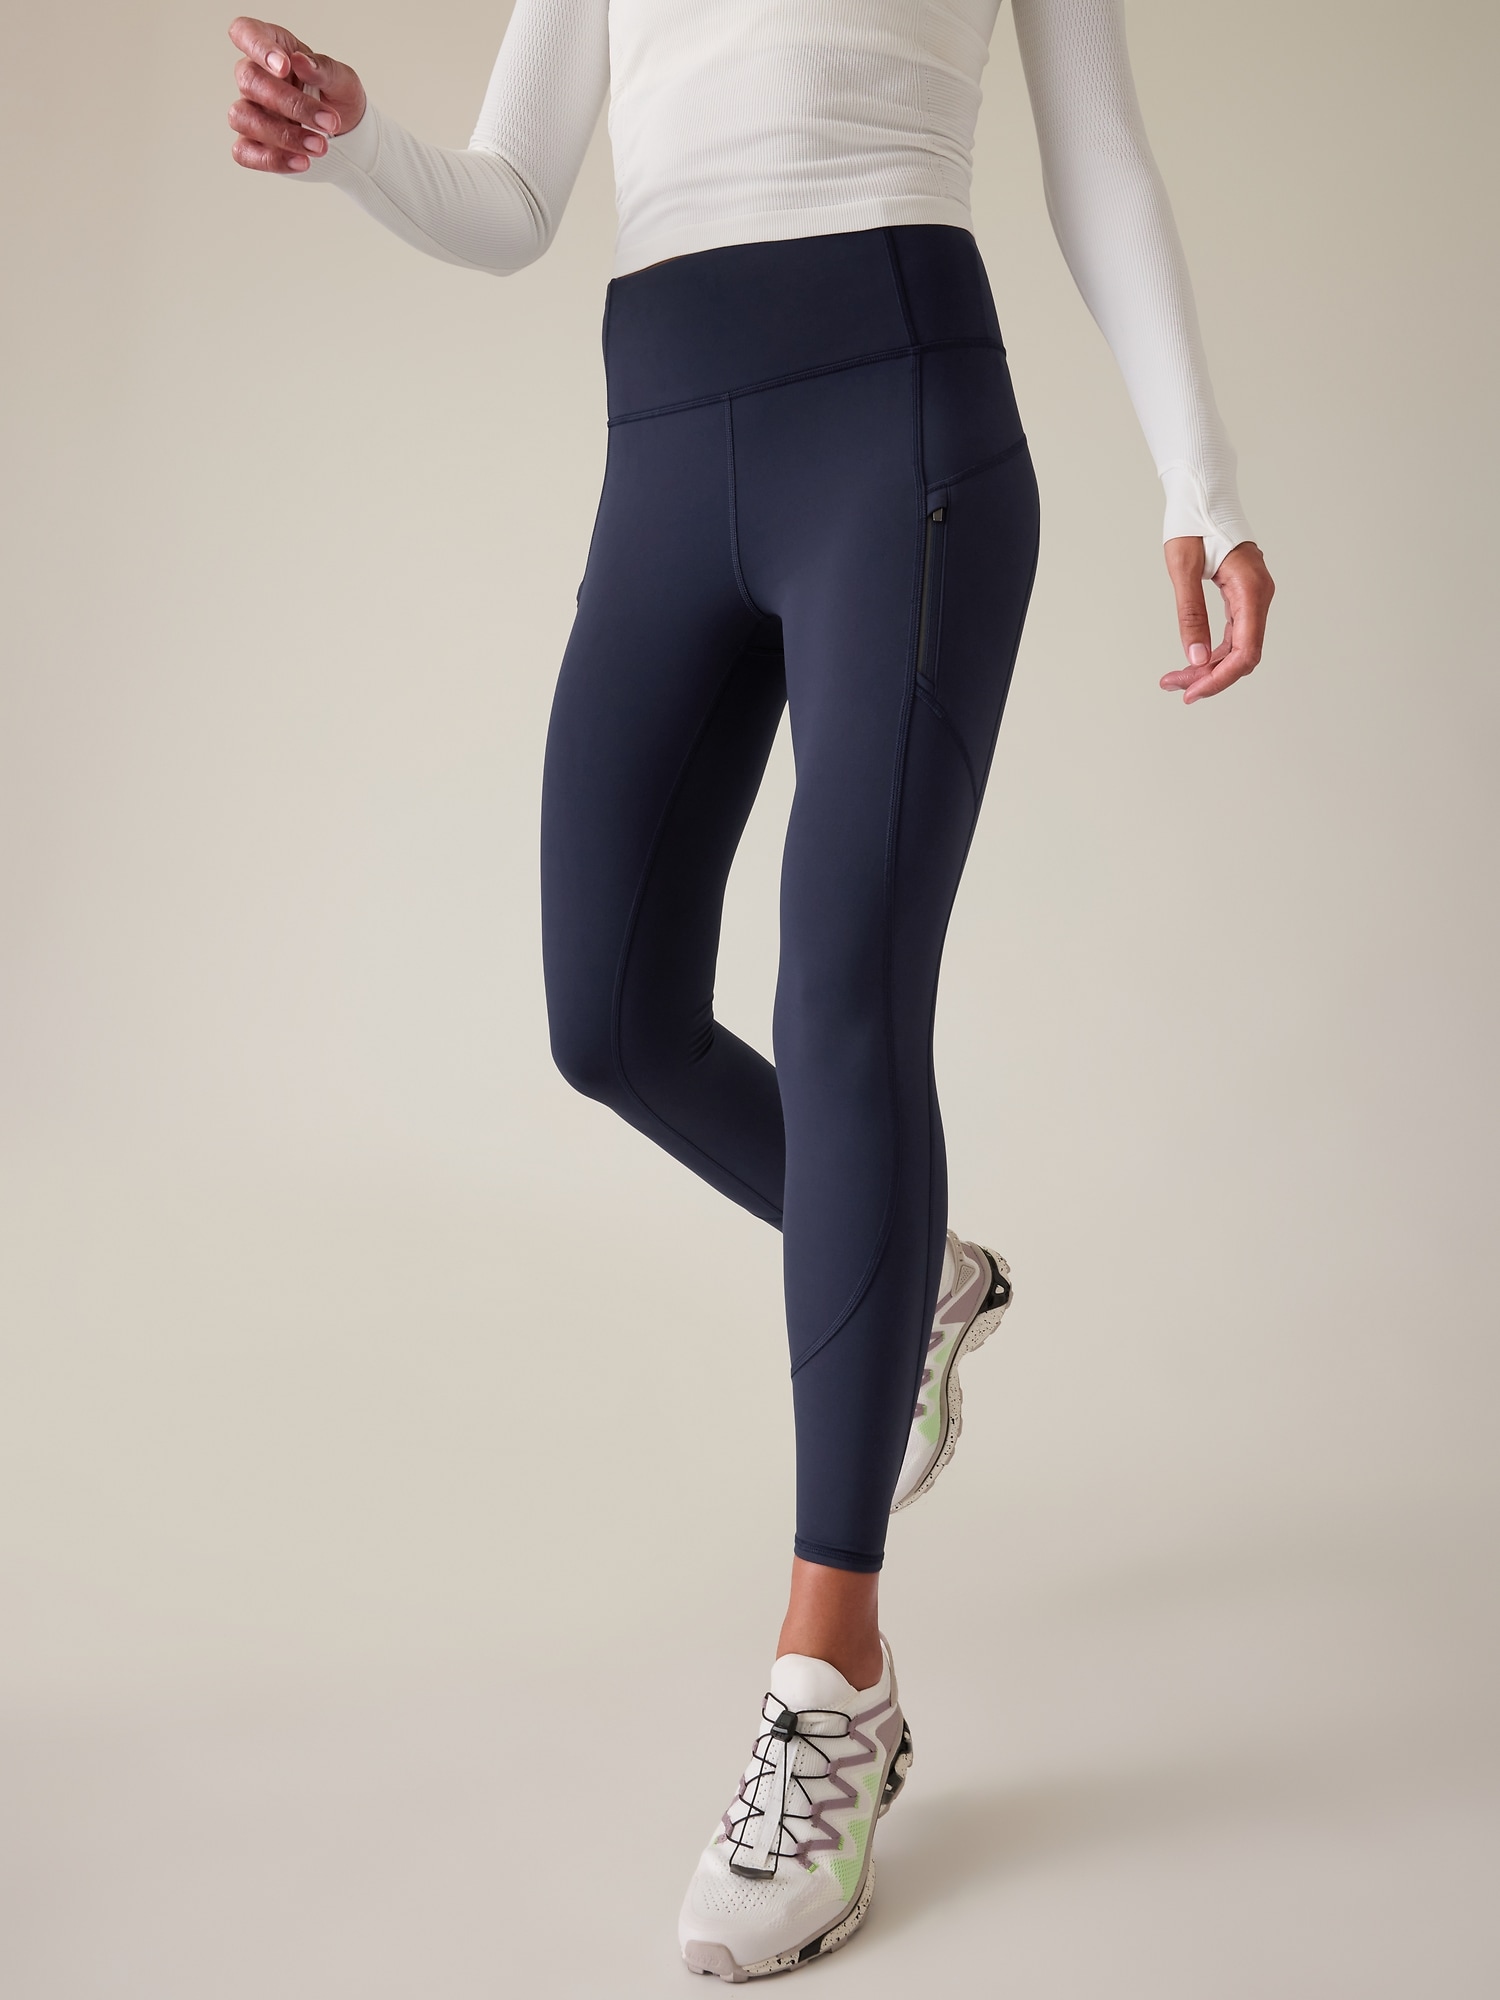 Must-Have Running Leggings: Athleta Rainier Tight​, 43 Fitness Must Haves  Our Editors Can't Get Enough Of